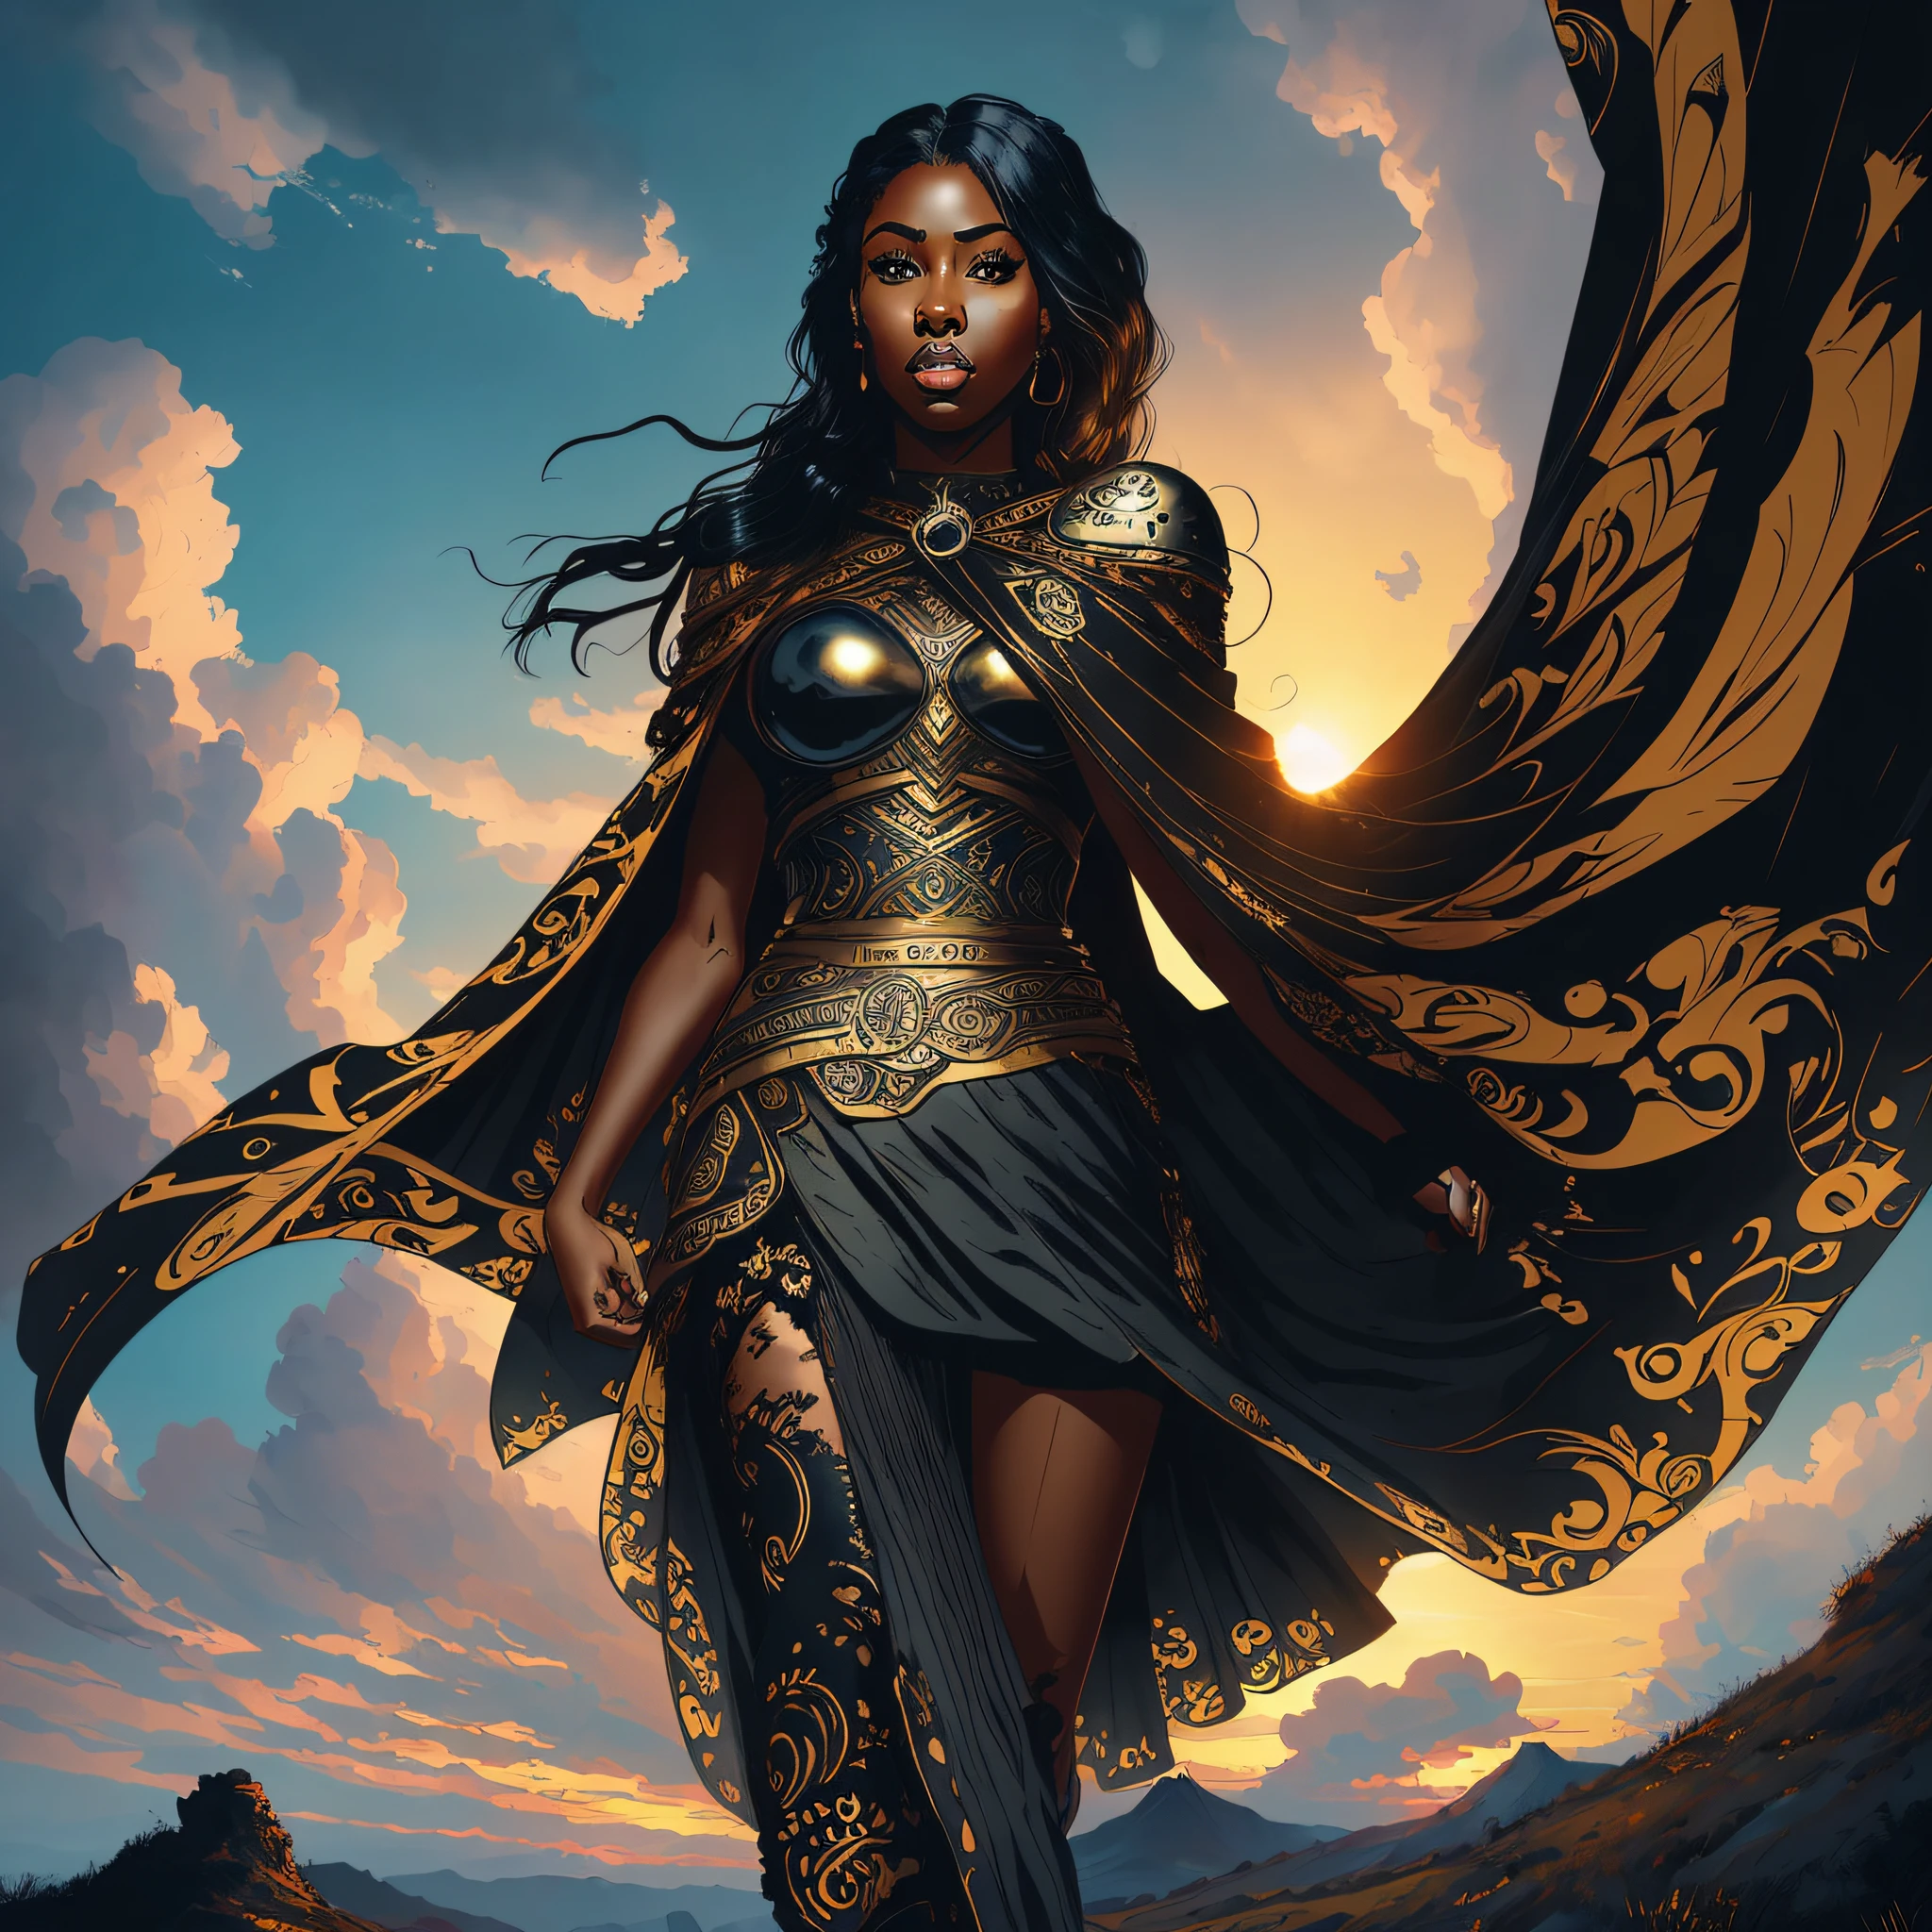 The illustration a young black woman. She has large, expressive eyes with long, curved lashes. Her skin is dark and with warrior paintings. No appeal. The young woman is dressed in a warrior's cape and long skirt. She wears props, a leather belt with a small bag hanging from it. On her feet, she wears leather boots. Around it, there is a fantasy landscape, with sky and clouds and the sun setting. This illustration conveys a sense of bravery, but also of mystery and adventure. It is an image that inspires the imagination and invites the viewer to explore these fantasies. --auto --s2